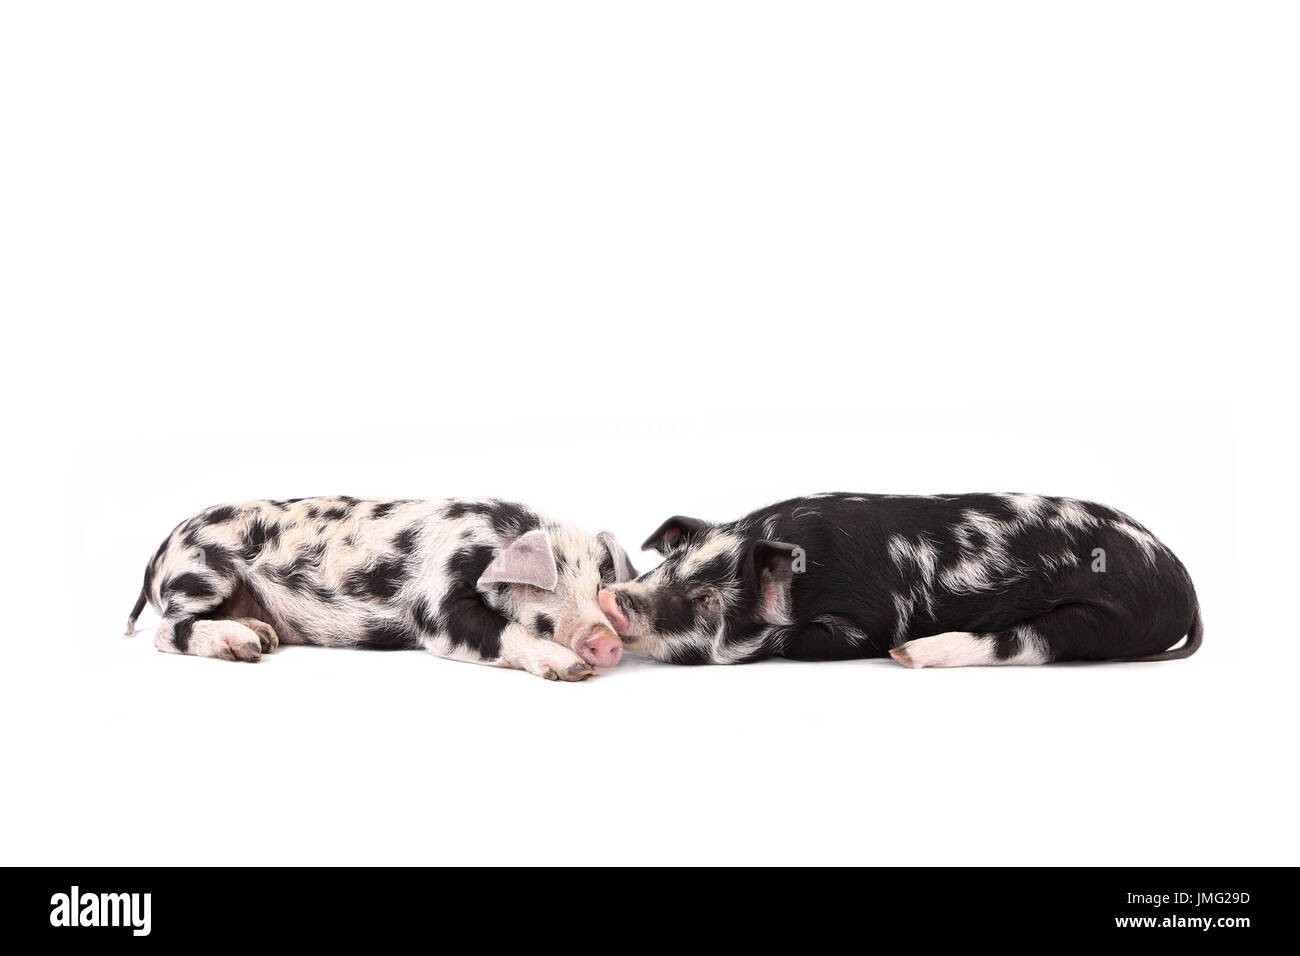 Turopolje Pig. Two piglets lying nose to nose. Studio picture against a white background. Germany Stock Photo